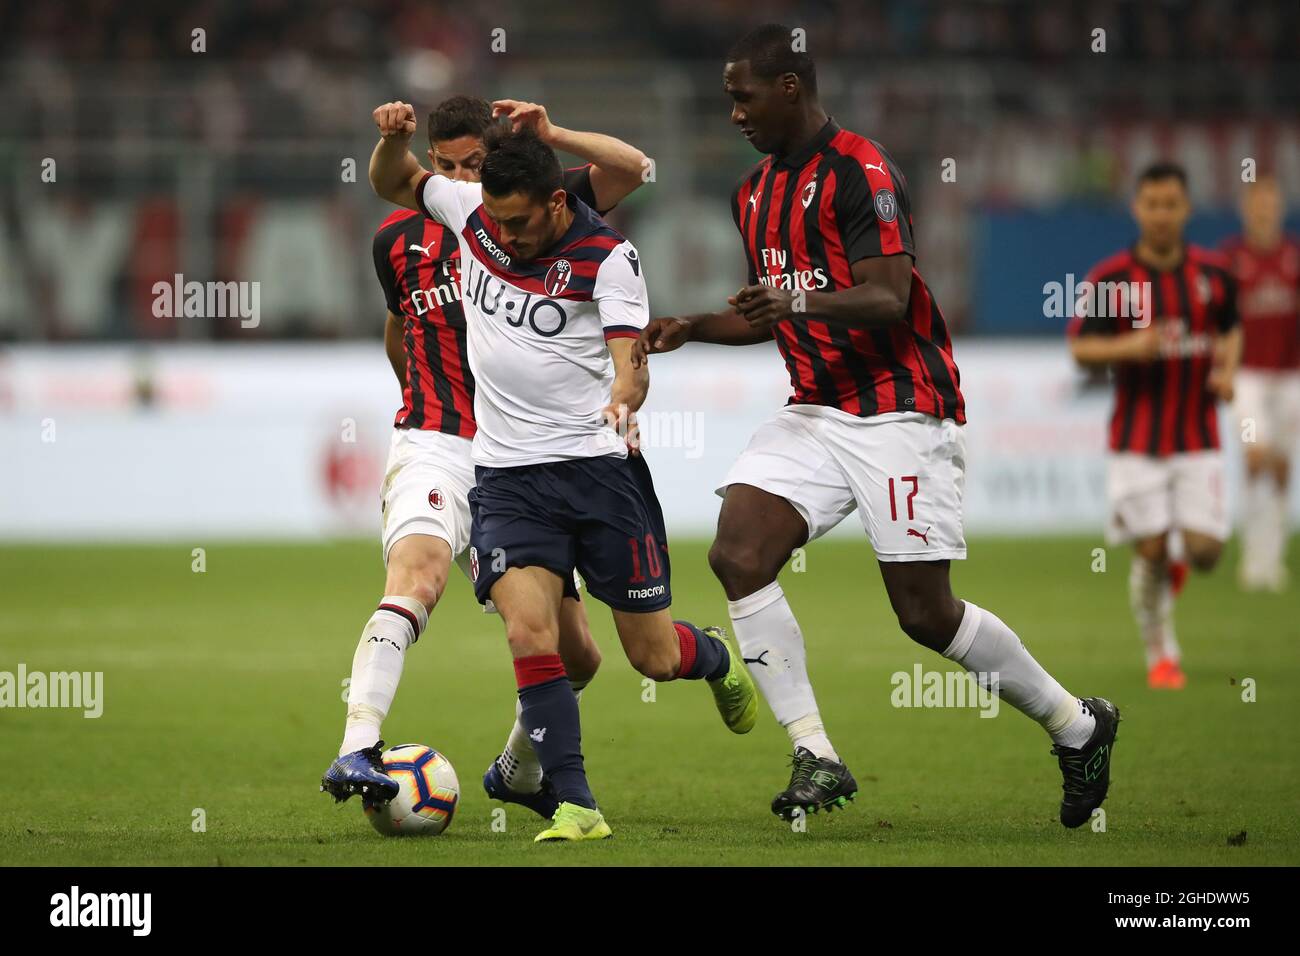 Nicola Sansone of Bologna is challenged by Mateo Musacchio and Cristian Zapata of AC Milan during the Serie A match at Giuseppe Meazza, Milan. Picture date: 6th May 2019. Picture credit should read: Jonathan Moscrop/Sportimage via PA Images Stock Photo